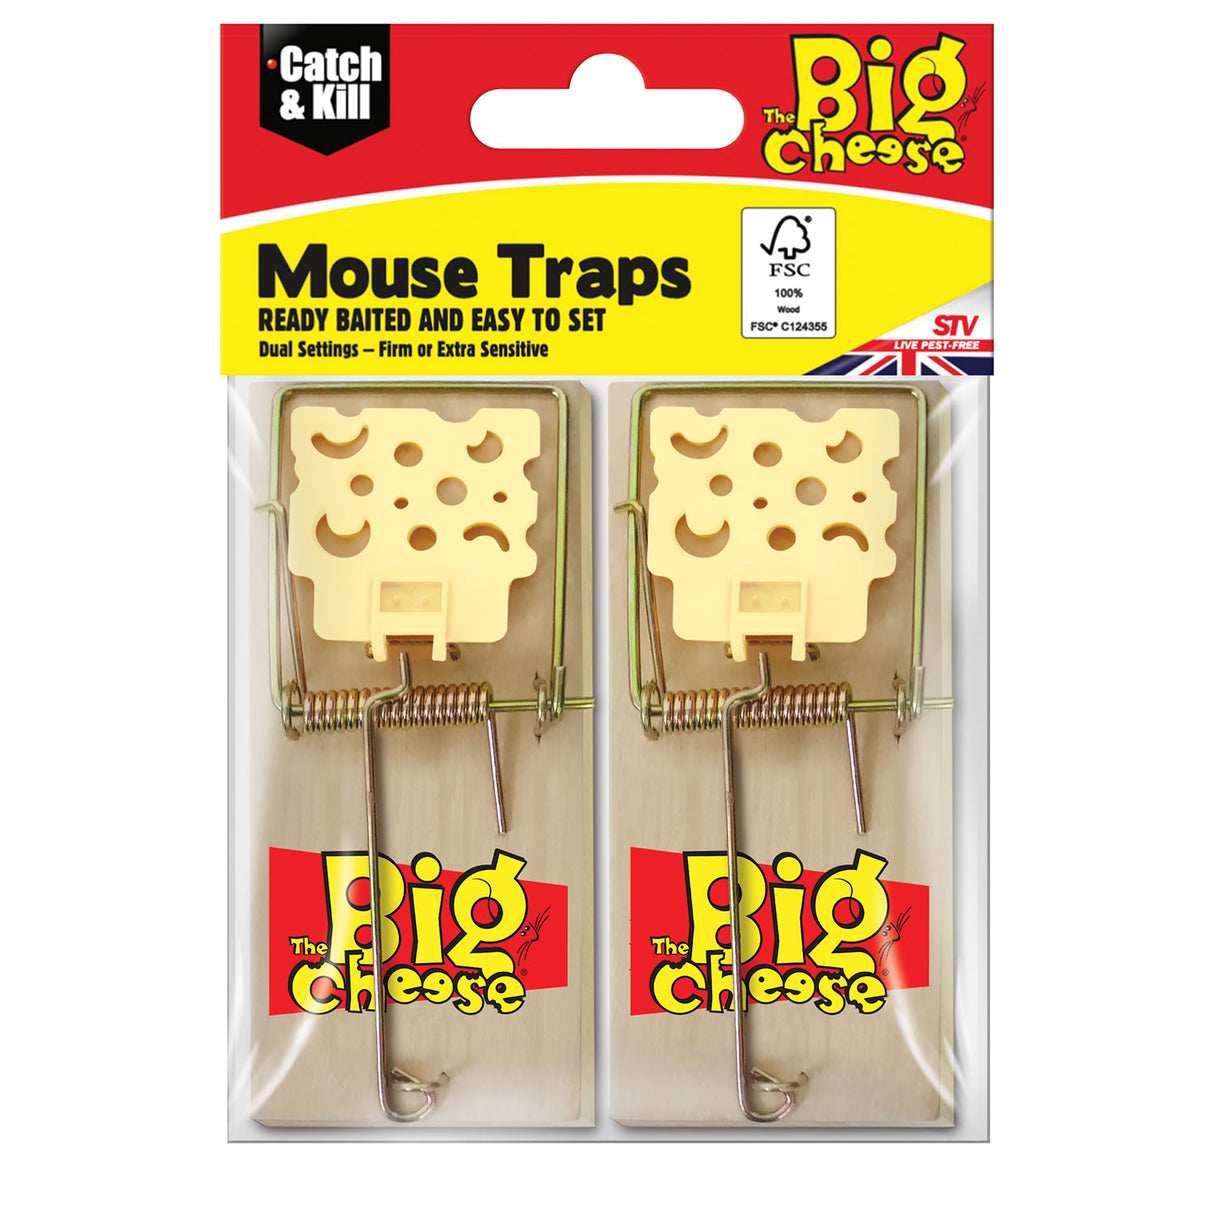 The Big Cheese Mouse Trap